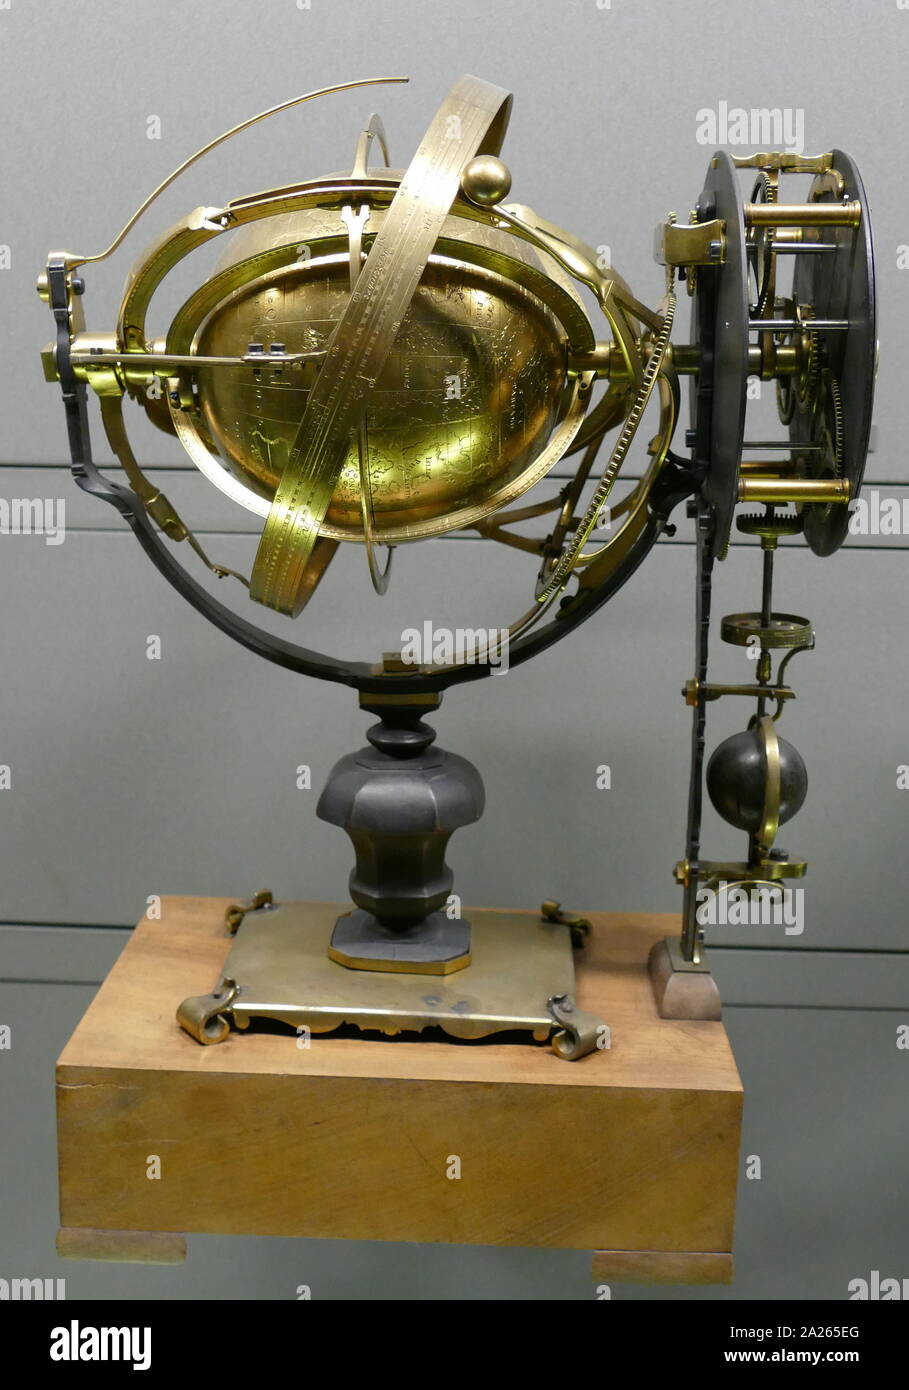 French armillary sphere, 18th century, brass. An armillary sphere (variations are known as spherical astrolabe, armillary, or armil) is a model of objects in the sky (on the celestial sphere), consisting of a spherical framework of rings, centred on Earth or the Sun, that represent lines of celestial longitude and latitude and other astronomically important features, such as the ecliptic. As such, it differs from a celestial globe, which is a smooth sphere whose principal purpose is to map the constellations. Stock Photo